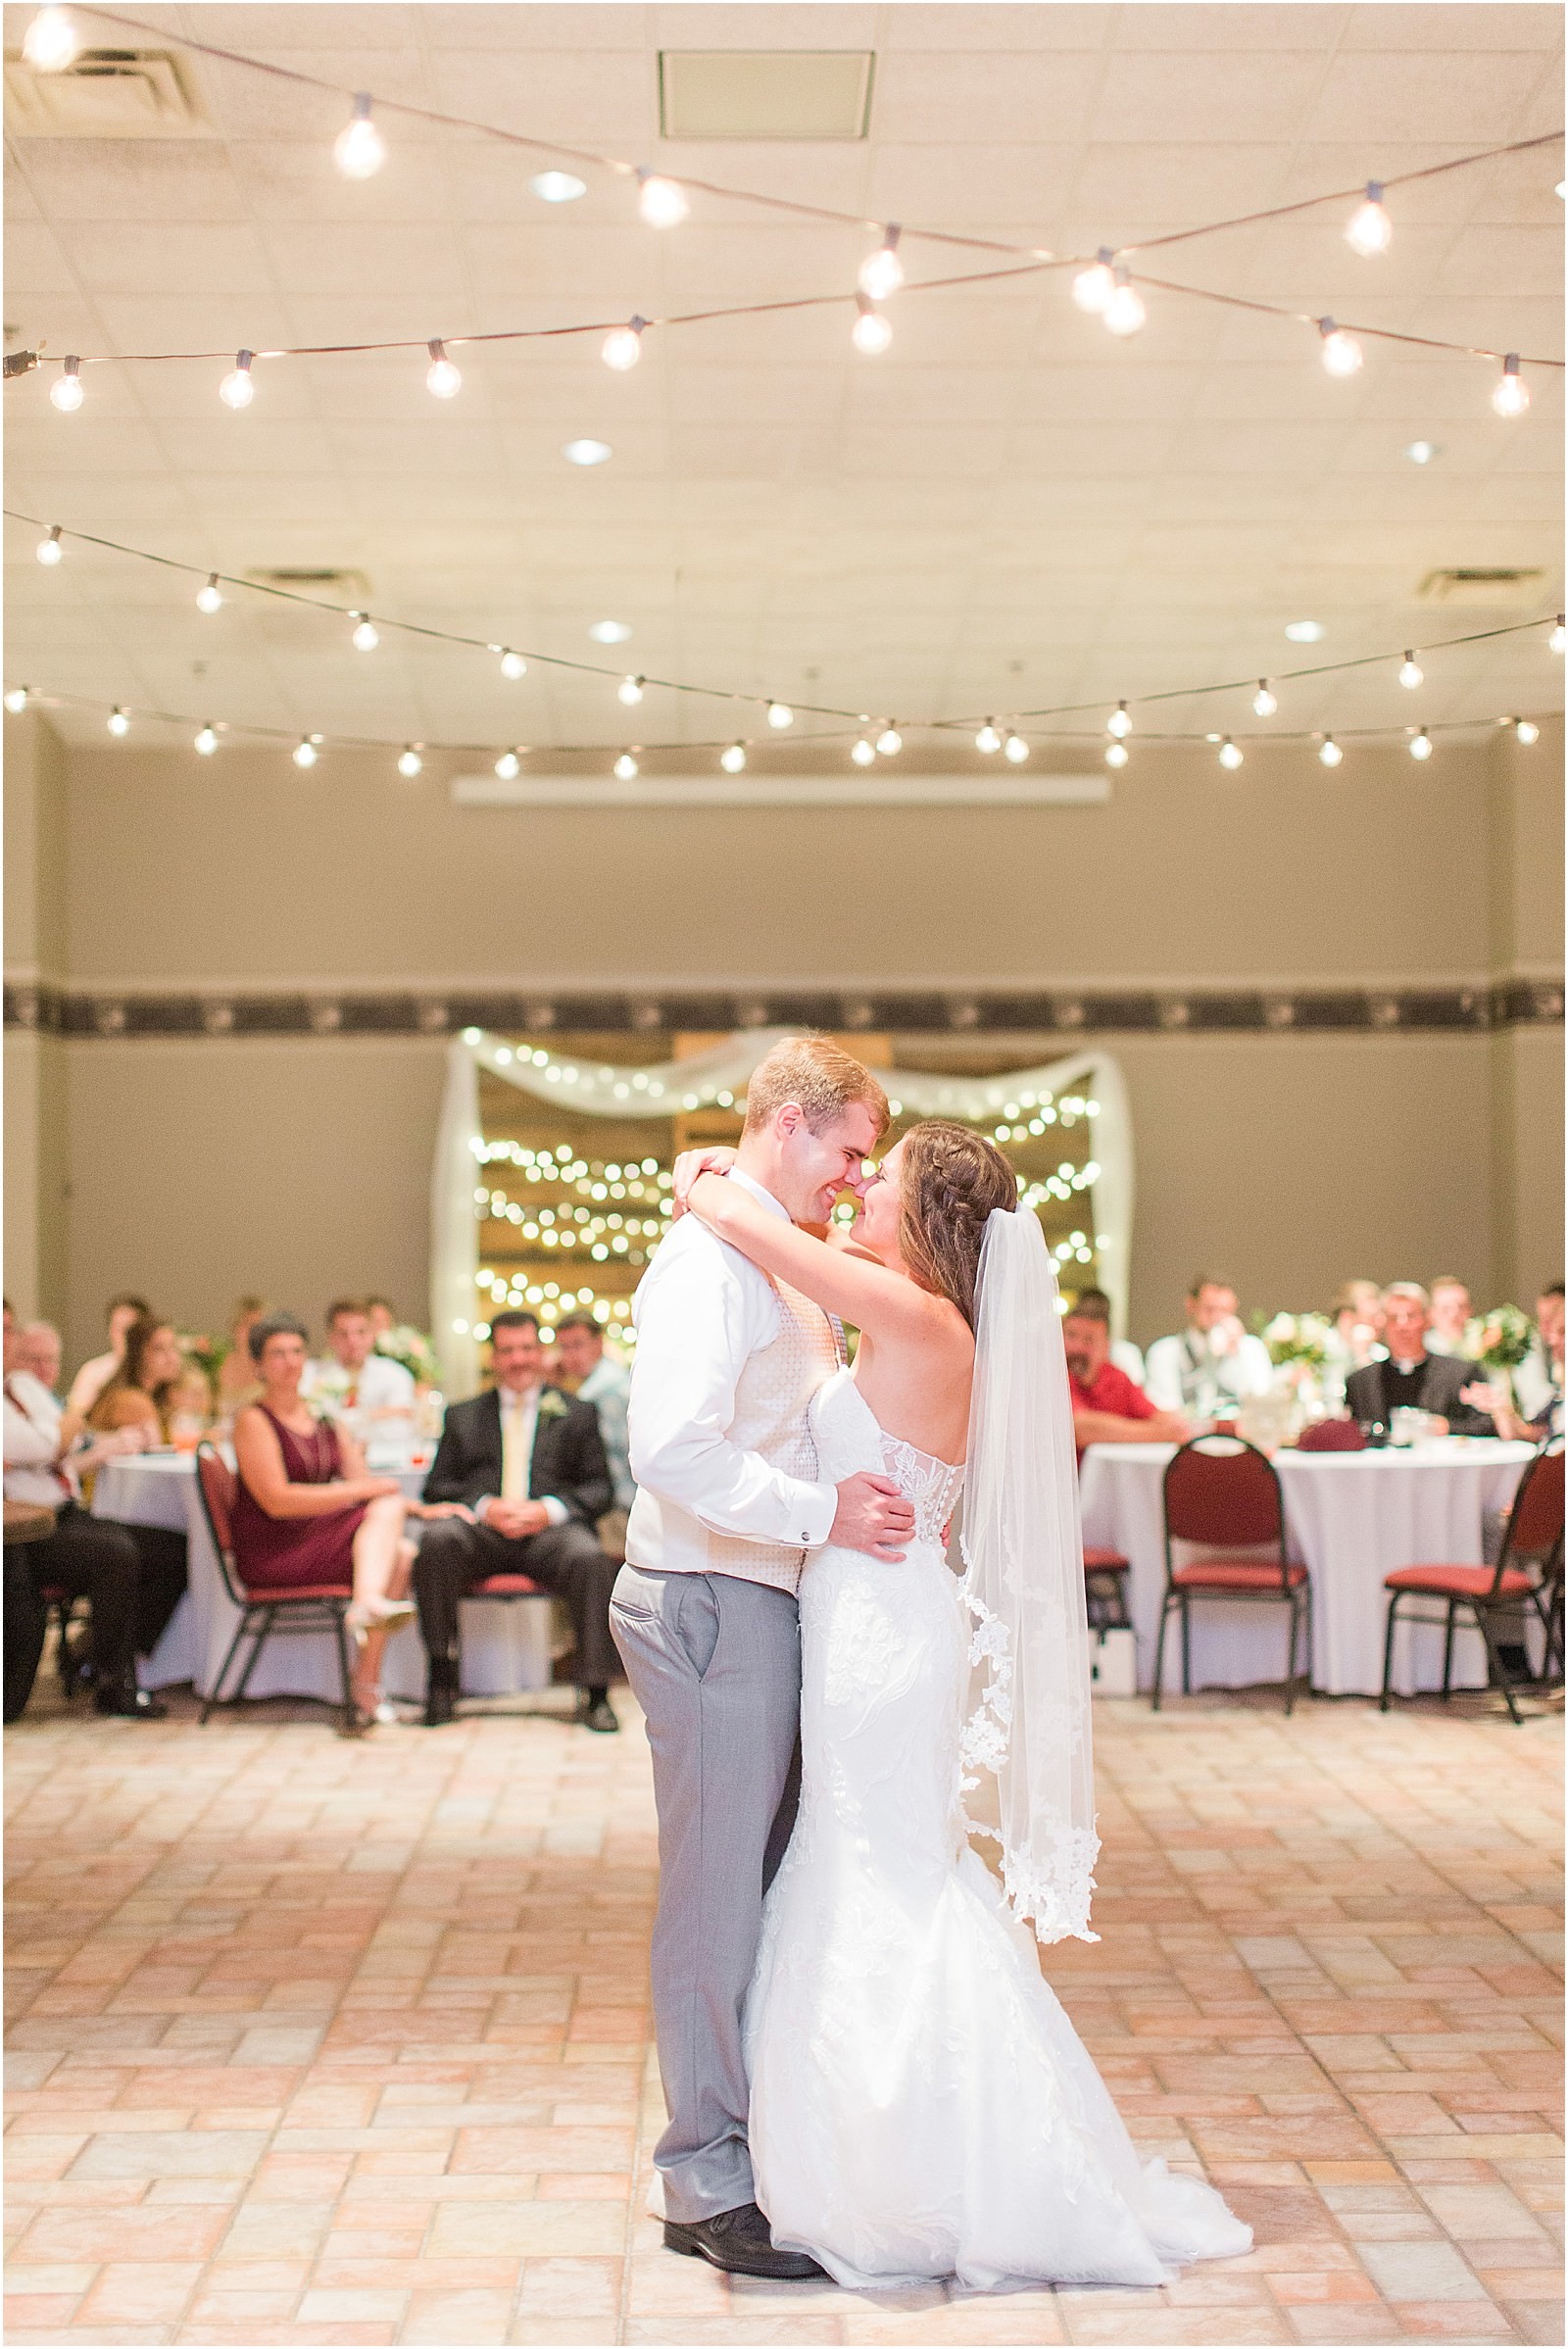 Stacey and Thomas | Blog095.jpg